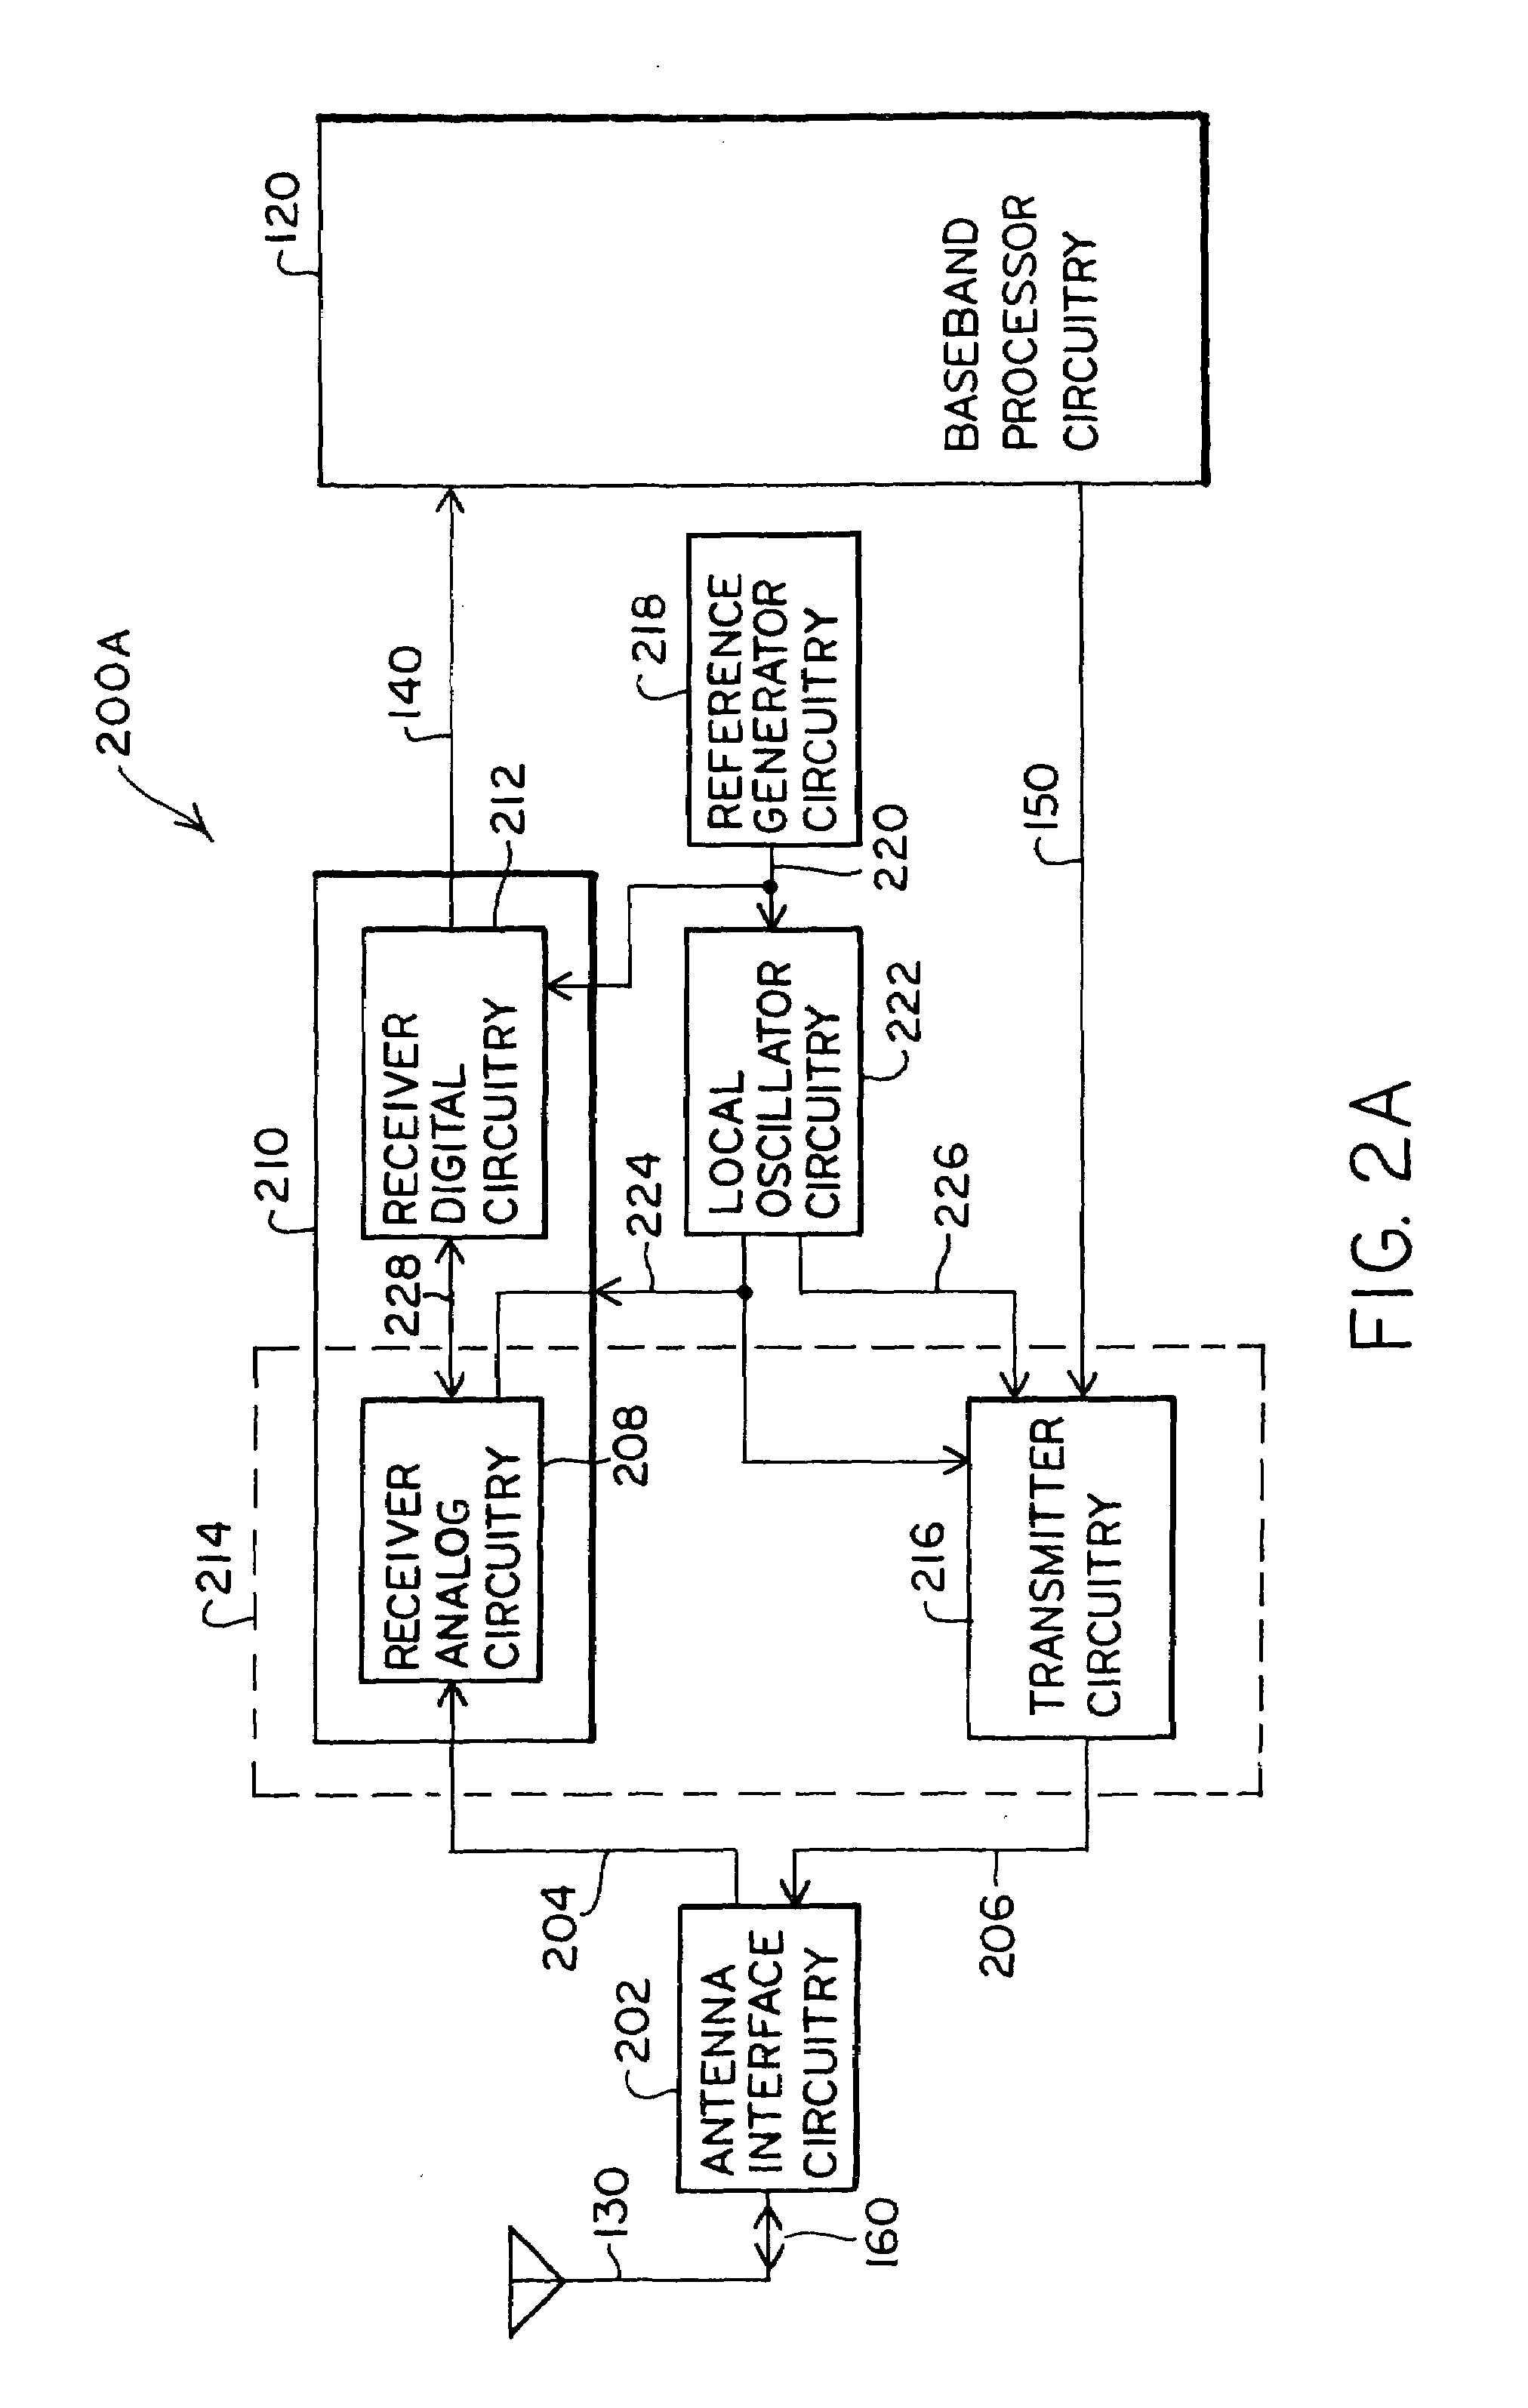 Apparatus and method for front-end circuitry in radio-frequency apparatus